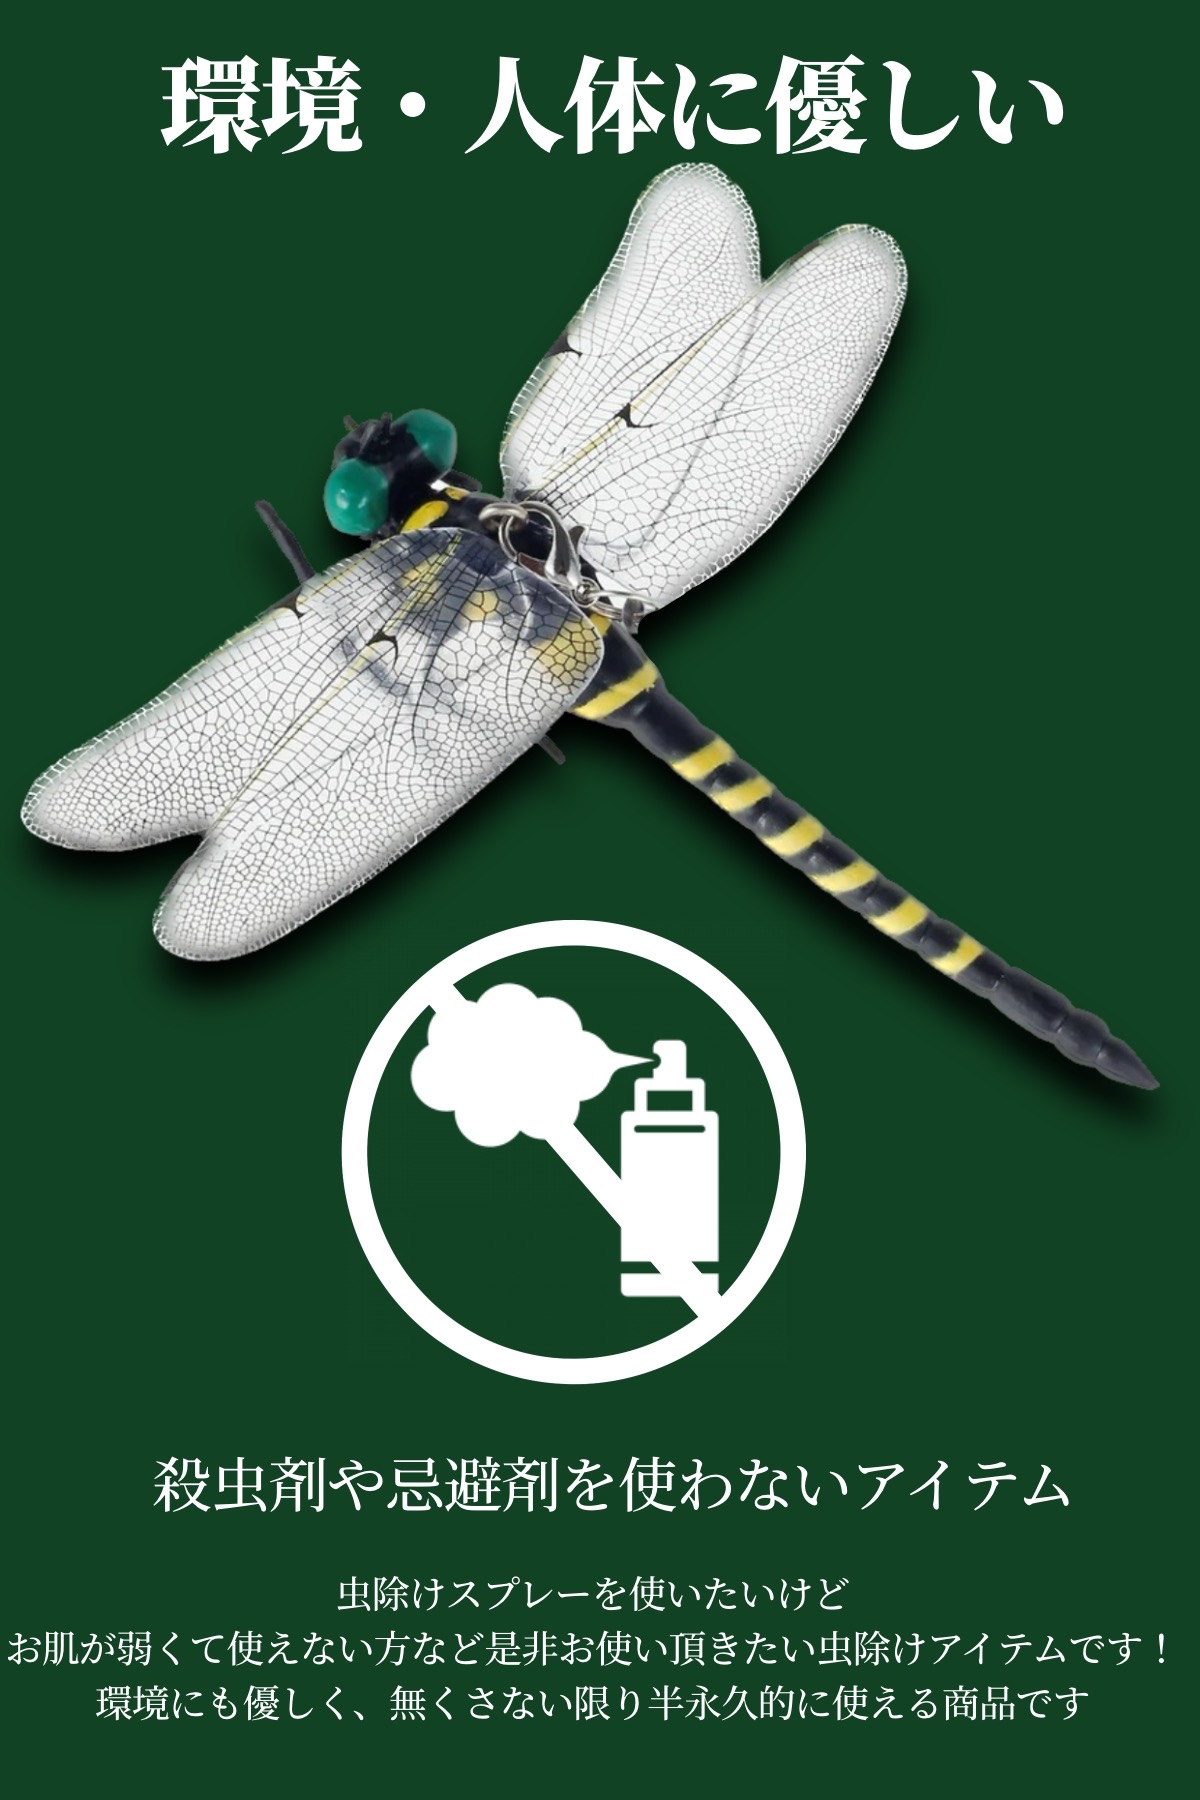  insect repellent insect repellent goods ..... the truth thing large 12cm×11cm strap safety pin attaching mosquito bee szme chopsticks outdoor camp entranceway Golf fishing oniyama